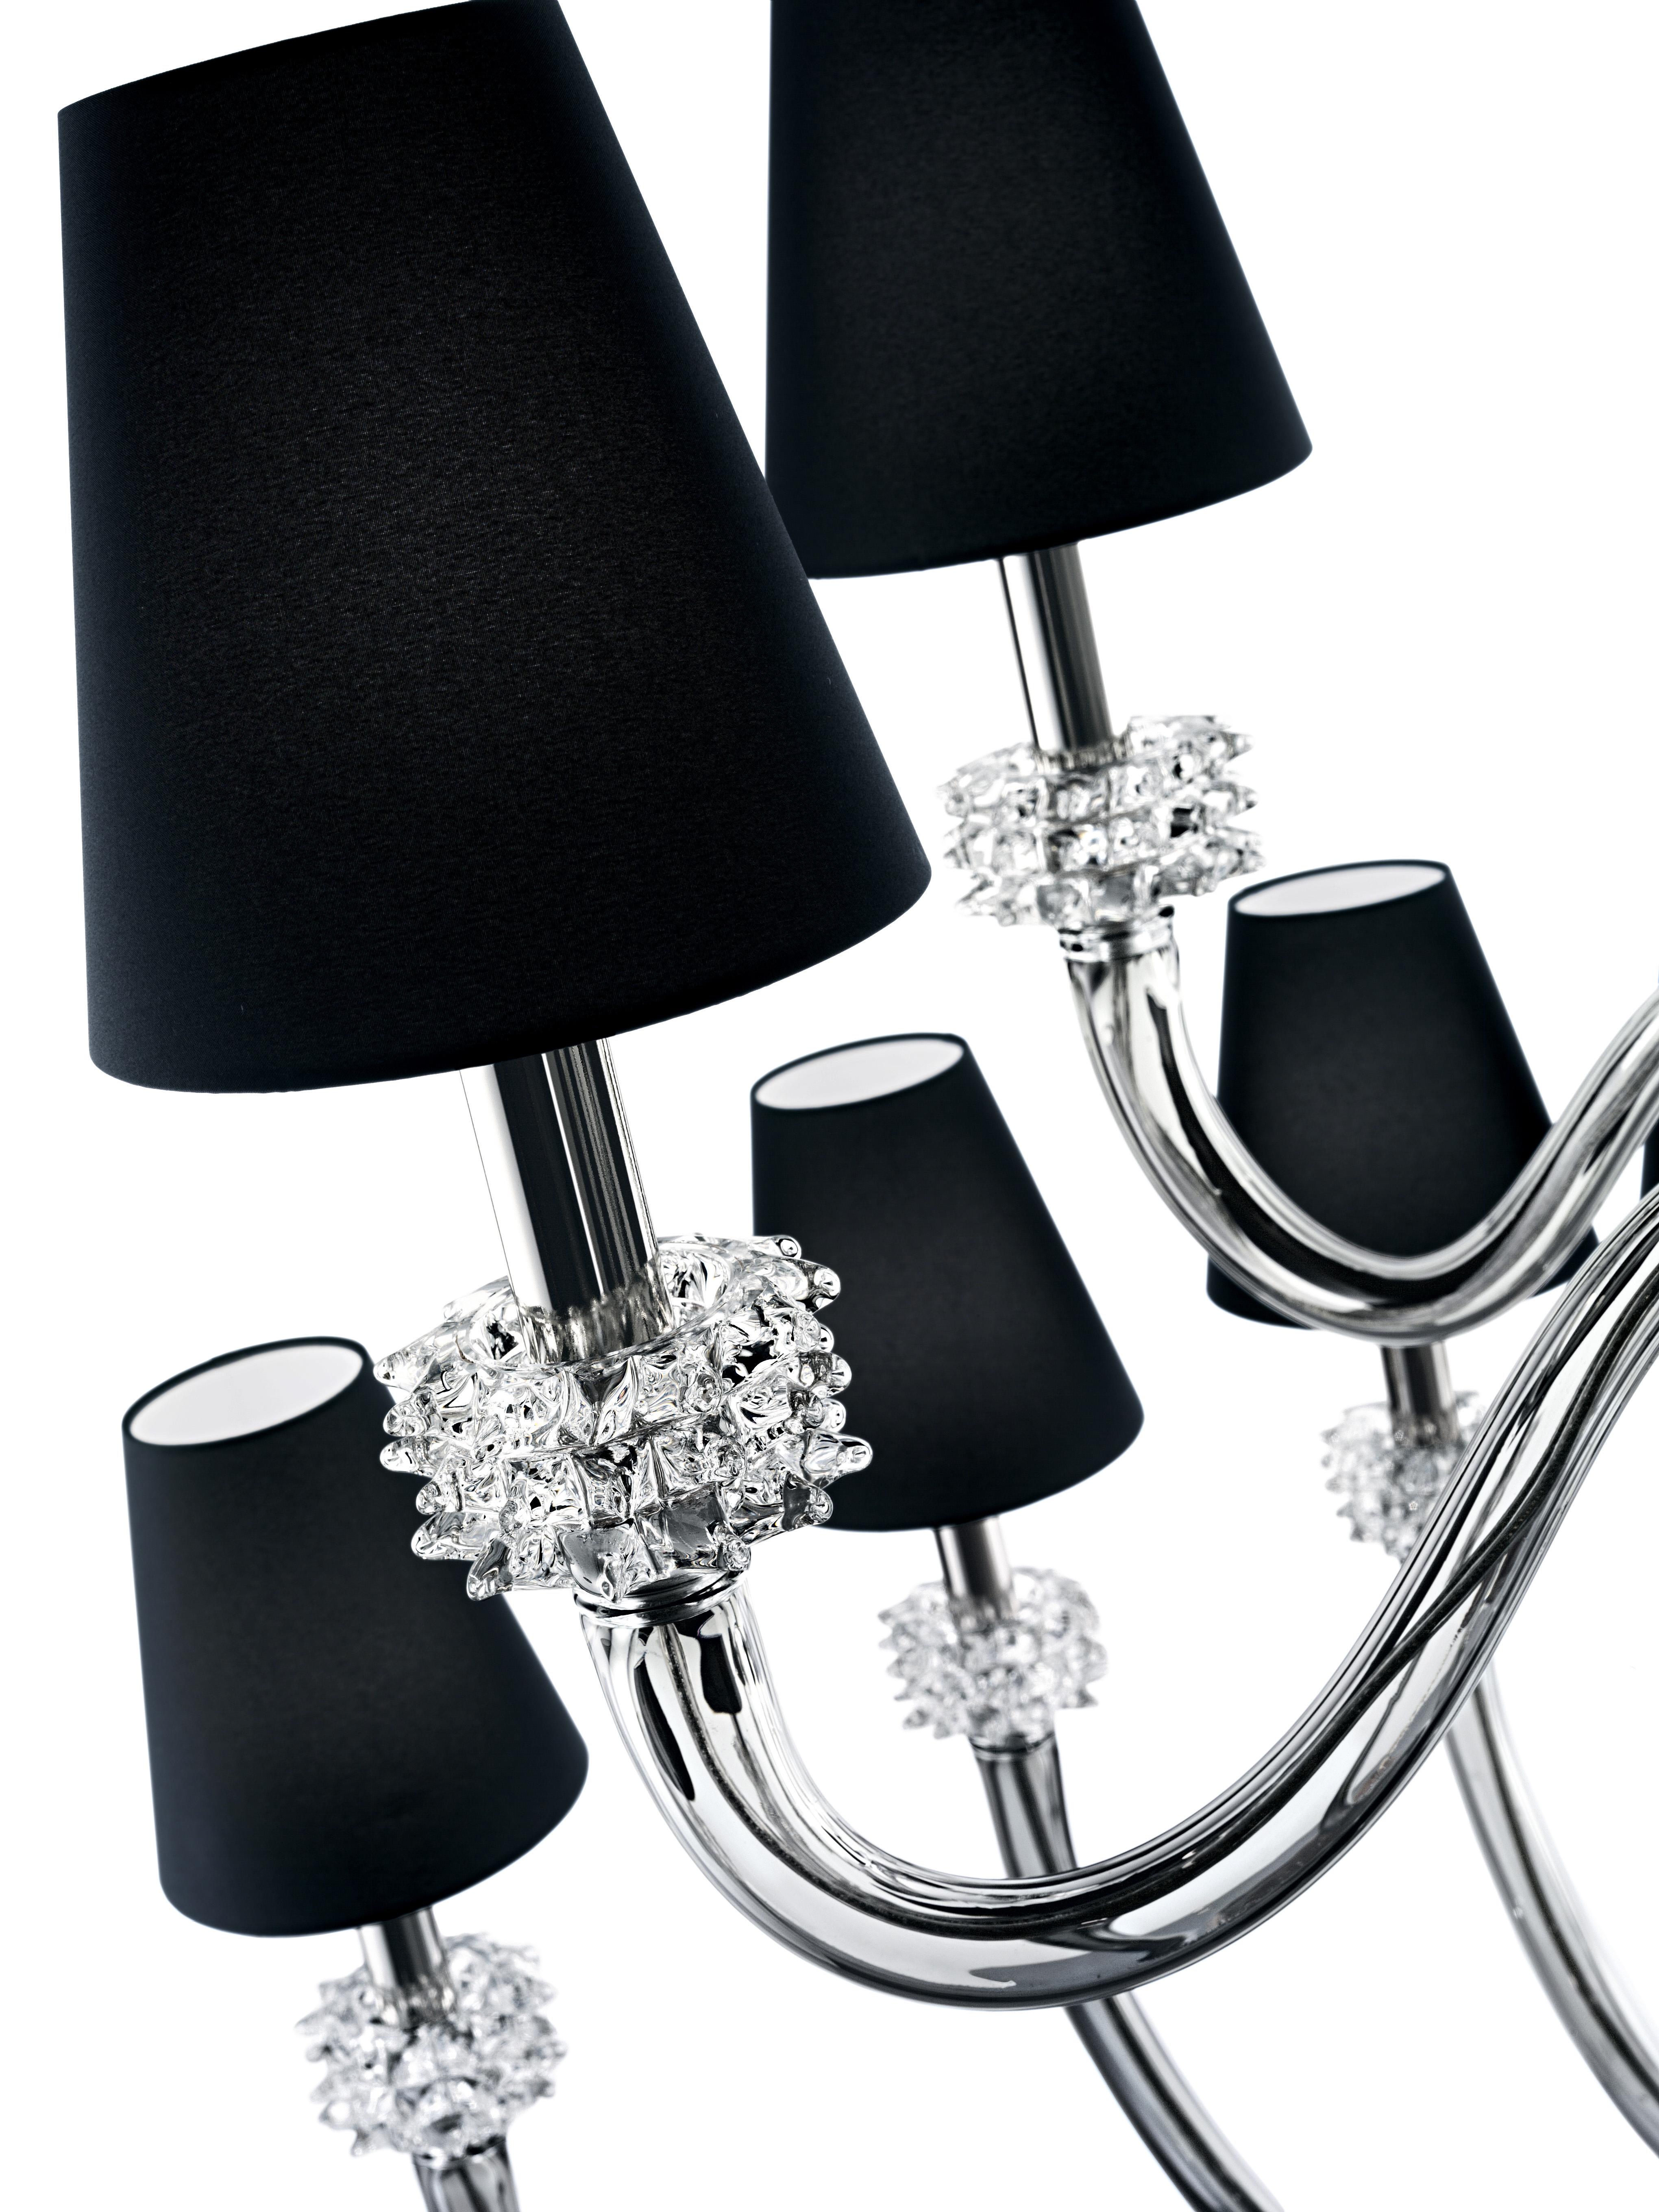 Gray (Grey_IC) Amsterdam 5562 18 Chandelier in Chrome & Glass, Black Shade, by Barovier&Toso 6